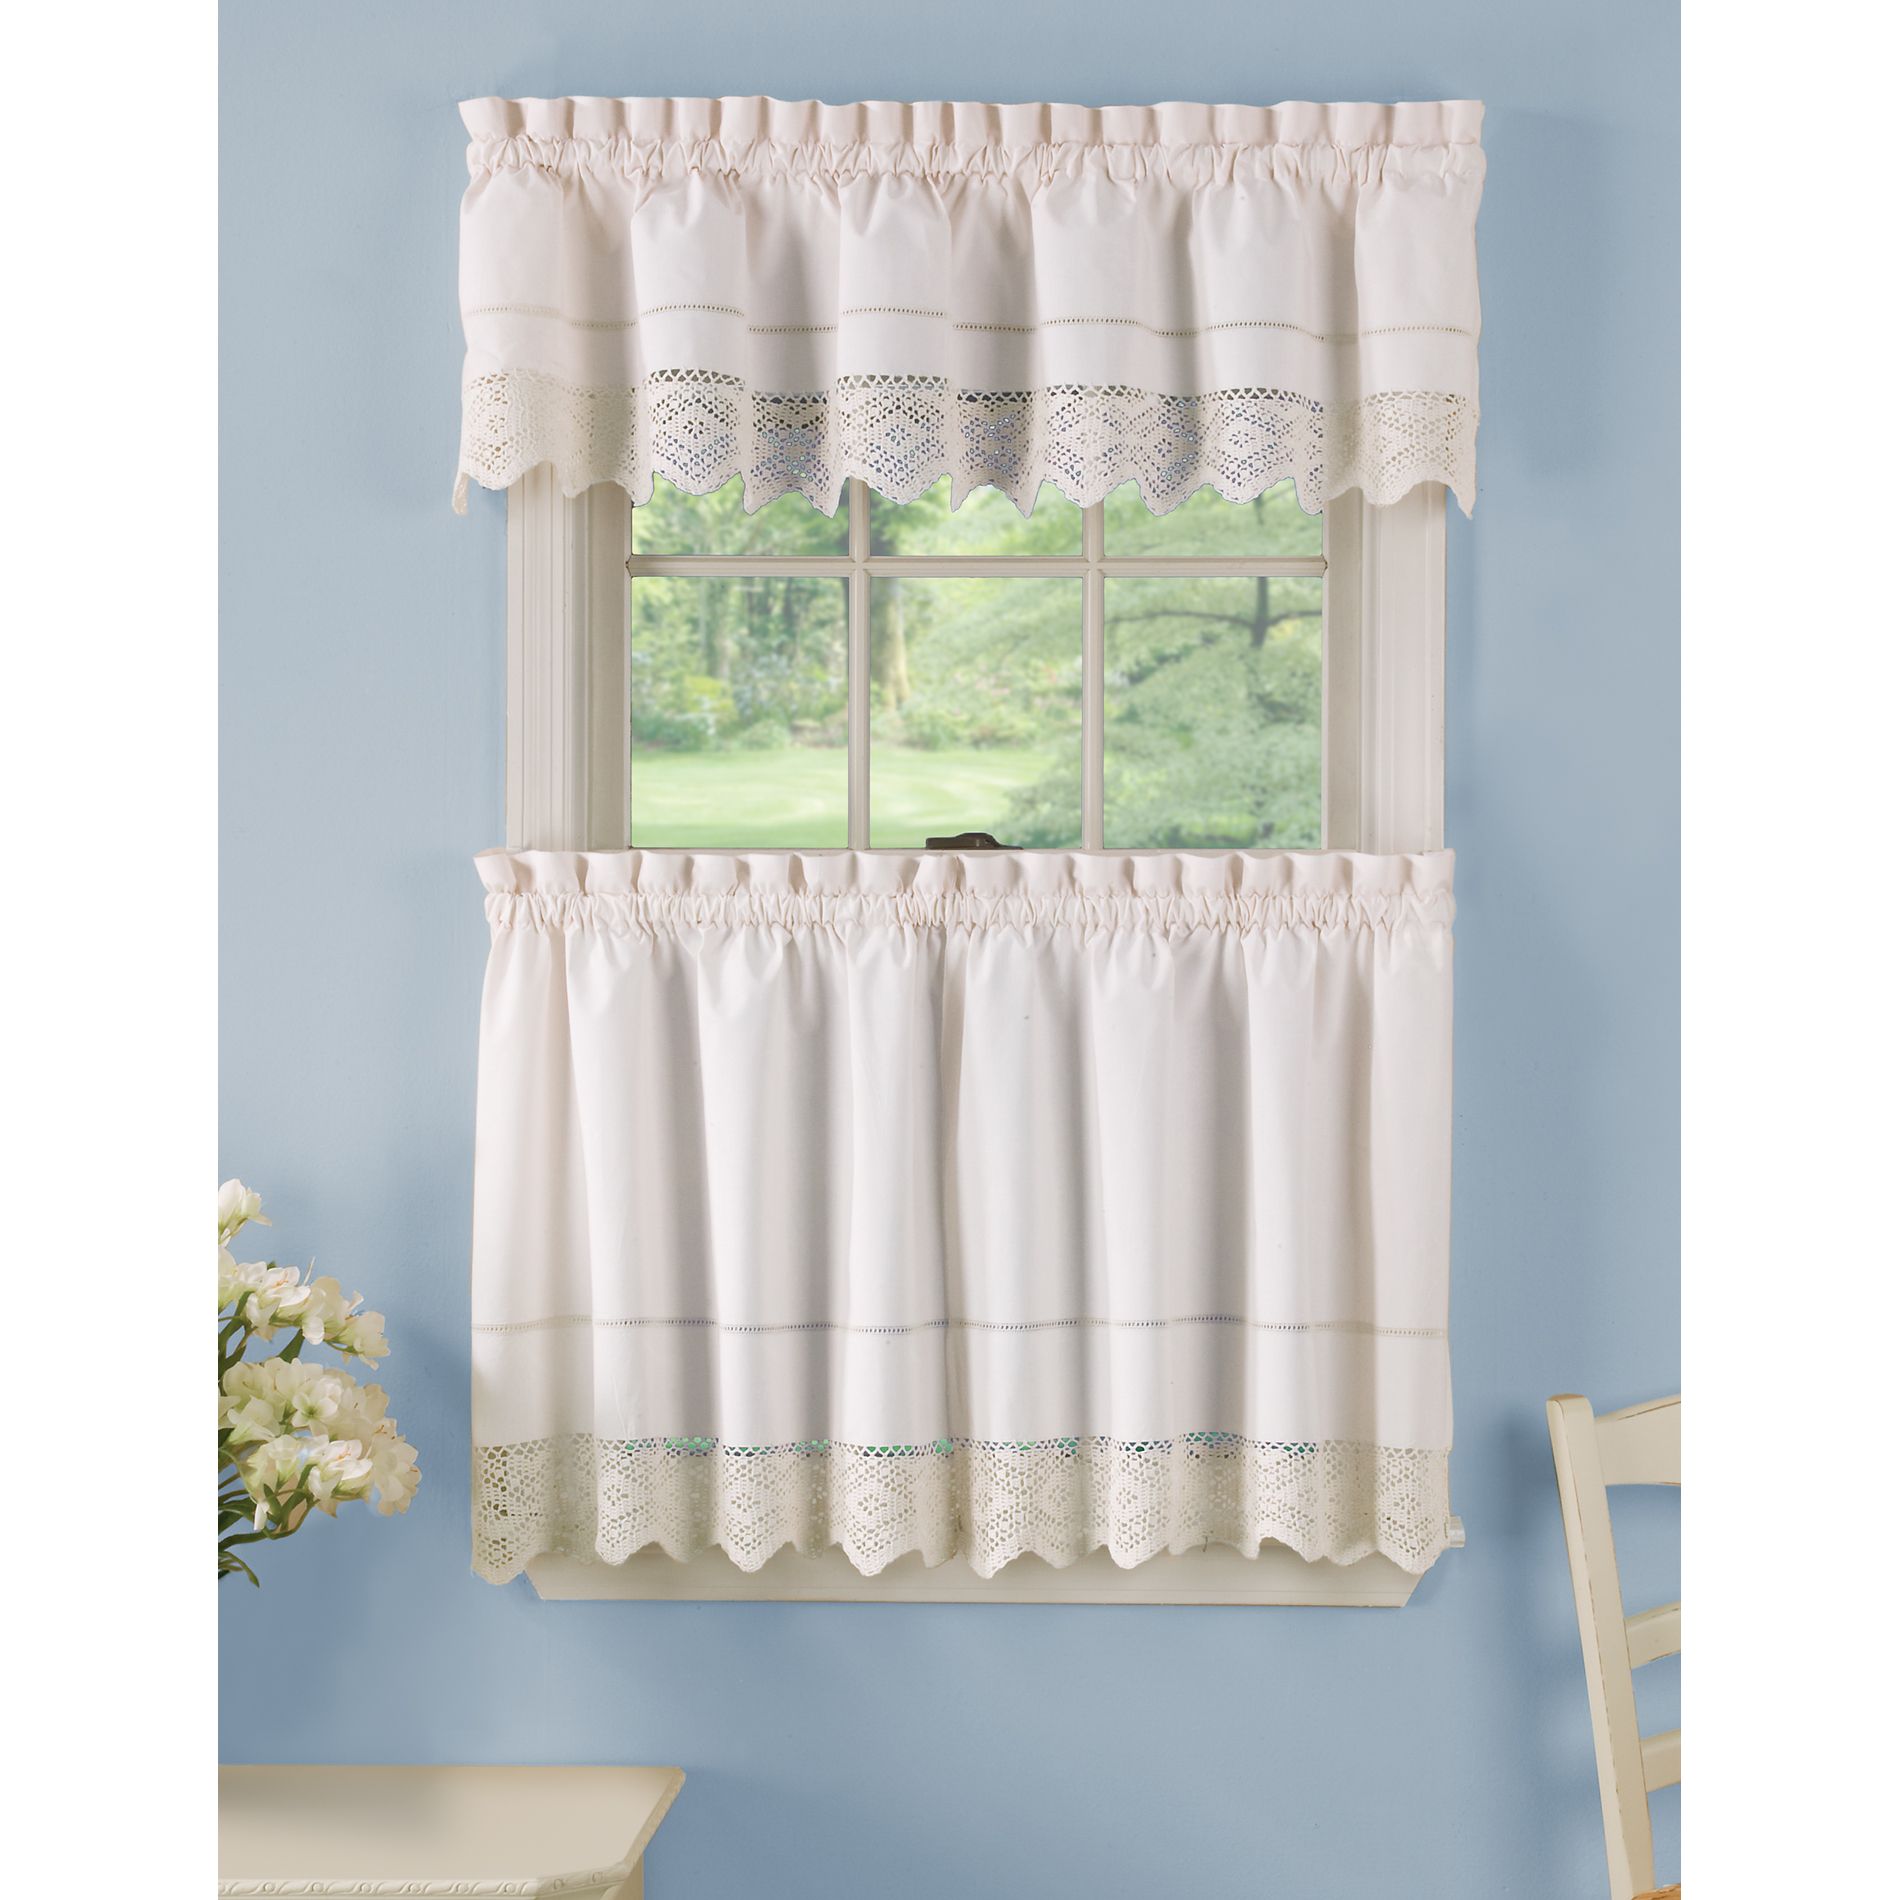 Country Classics White Crochet Tier Curtains